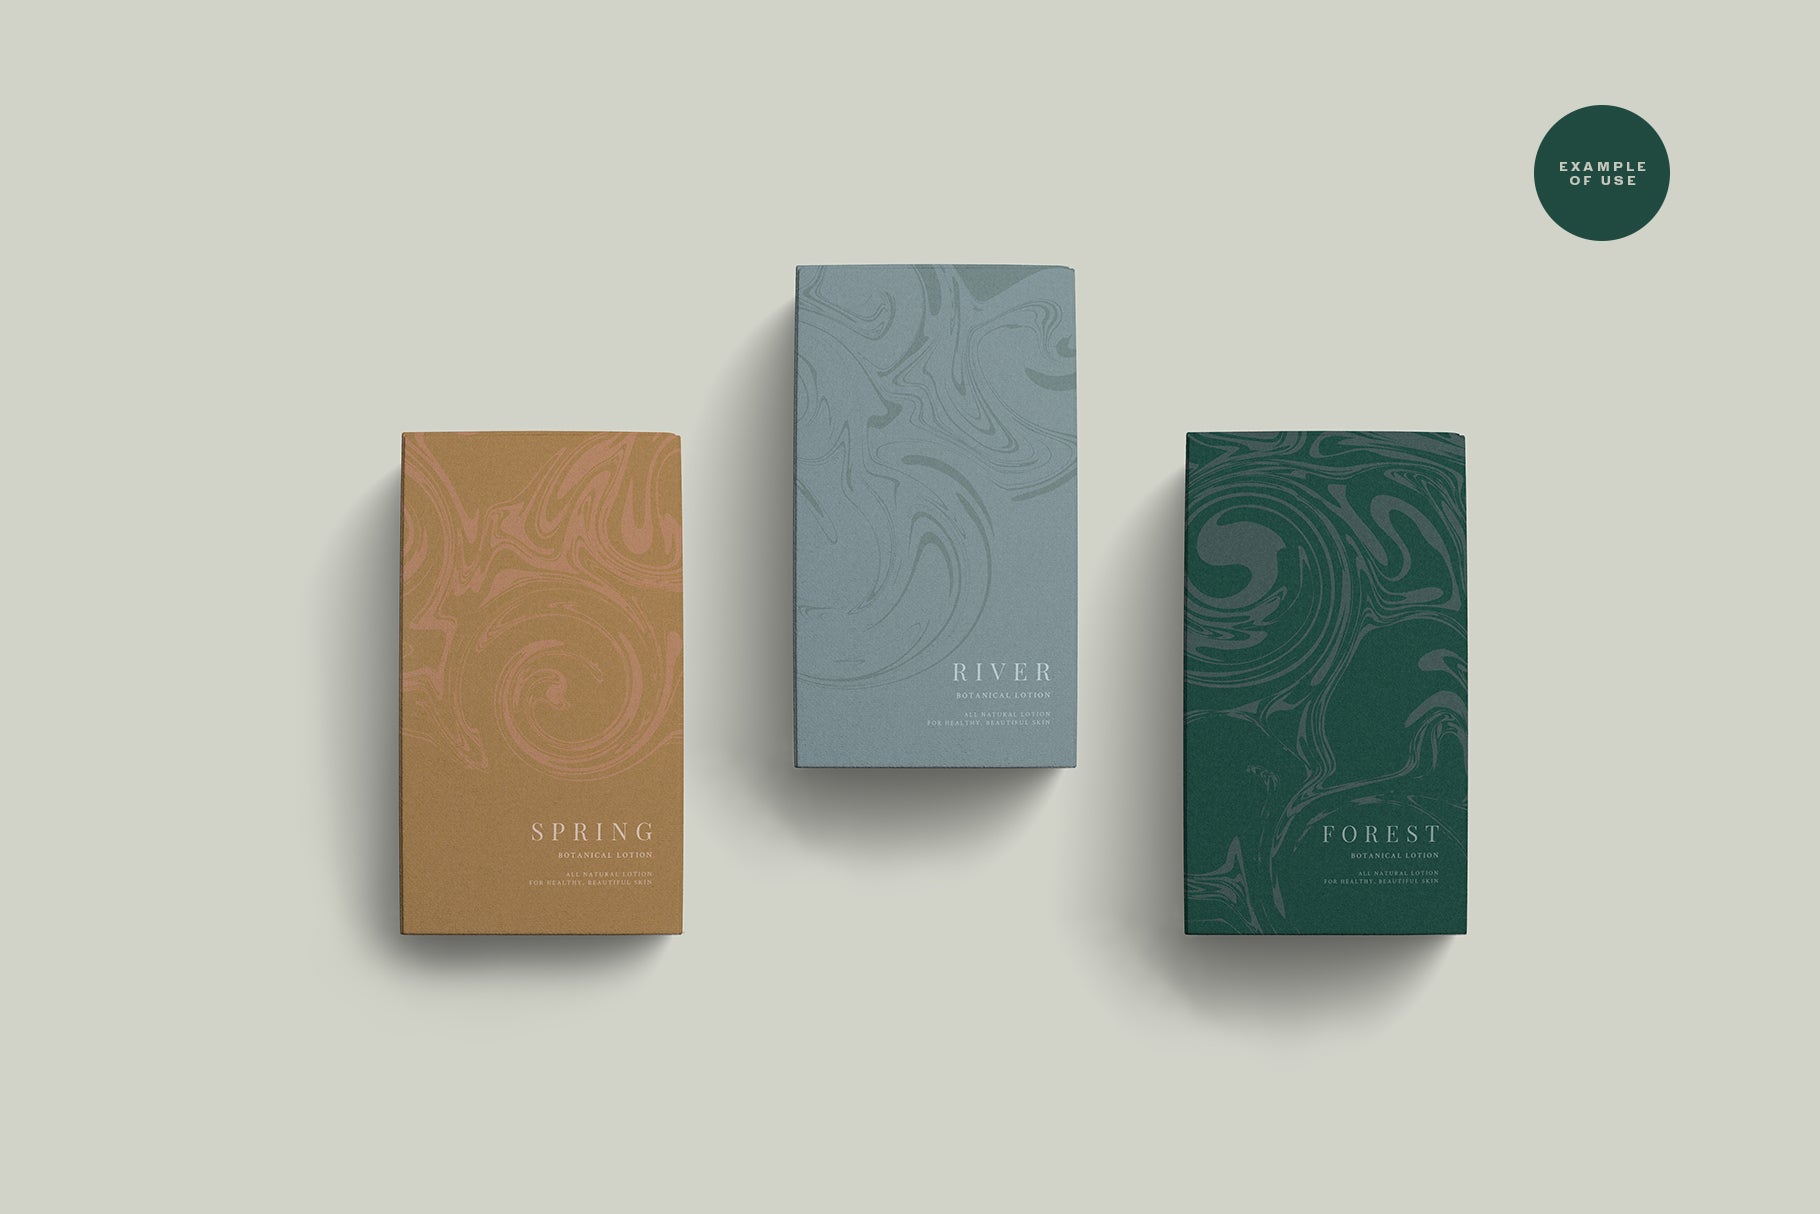 elegant packaging design with swirl graphic elements